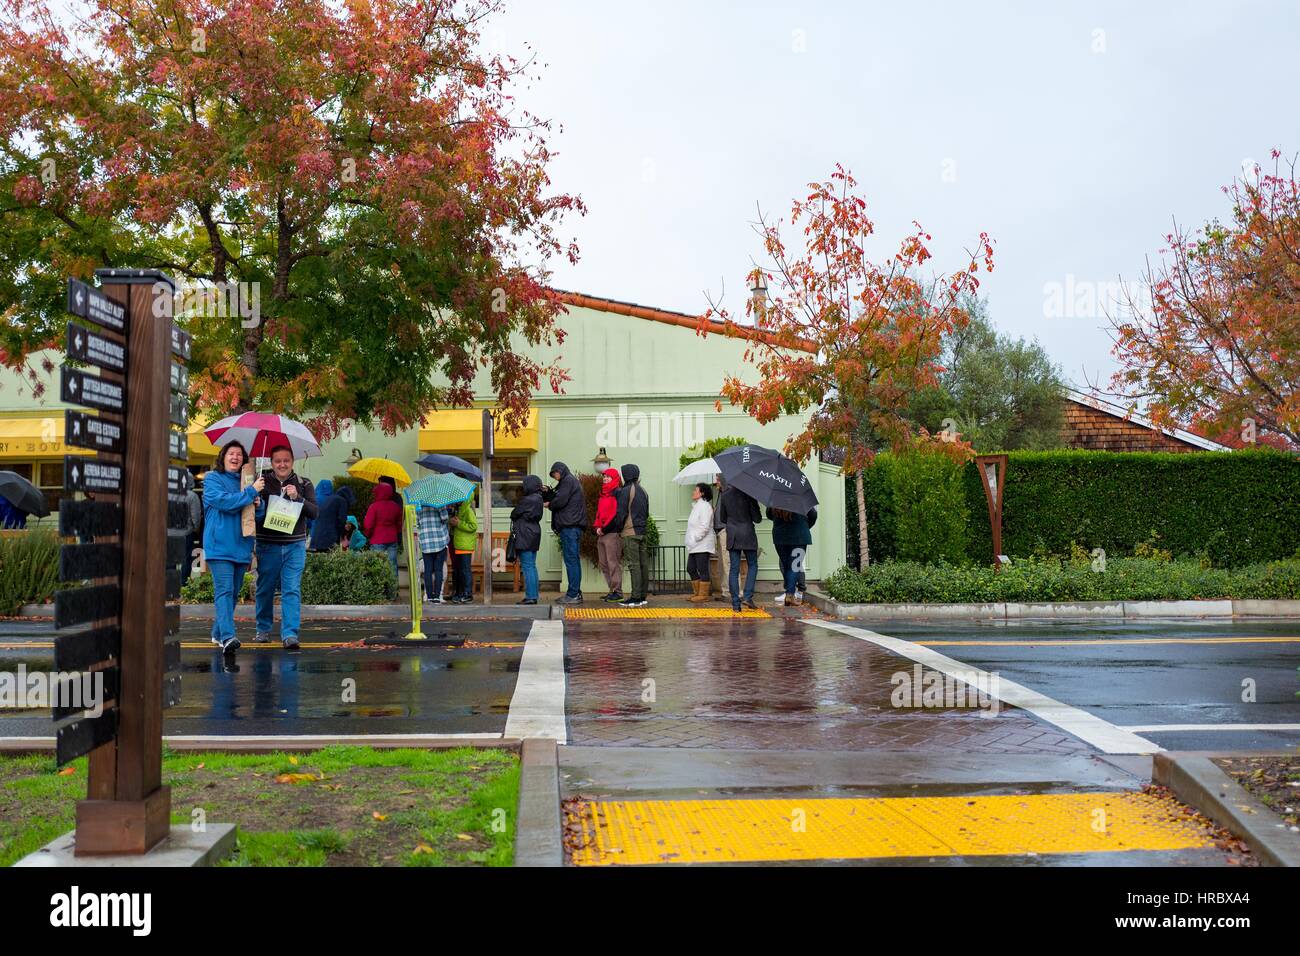 Tourists wait in the rain outside Bouchon Bakery in Yountville, Napa Valley, California, November 26, 2016. The restaurant, operated by chef Thomas Keller, is a popular spot for visitors to the Napa Valley. Stock Photo